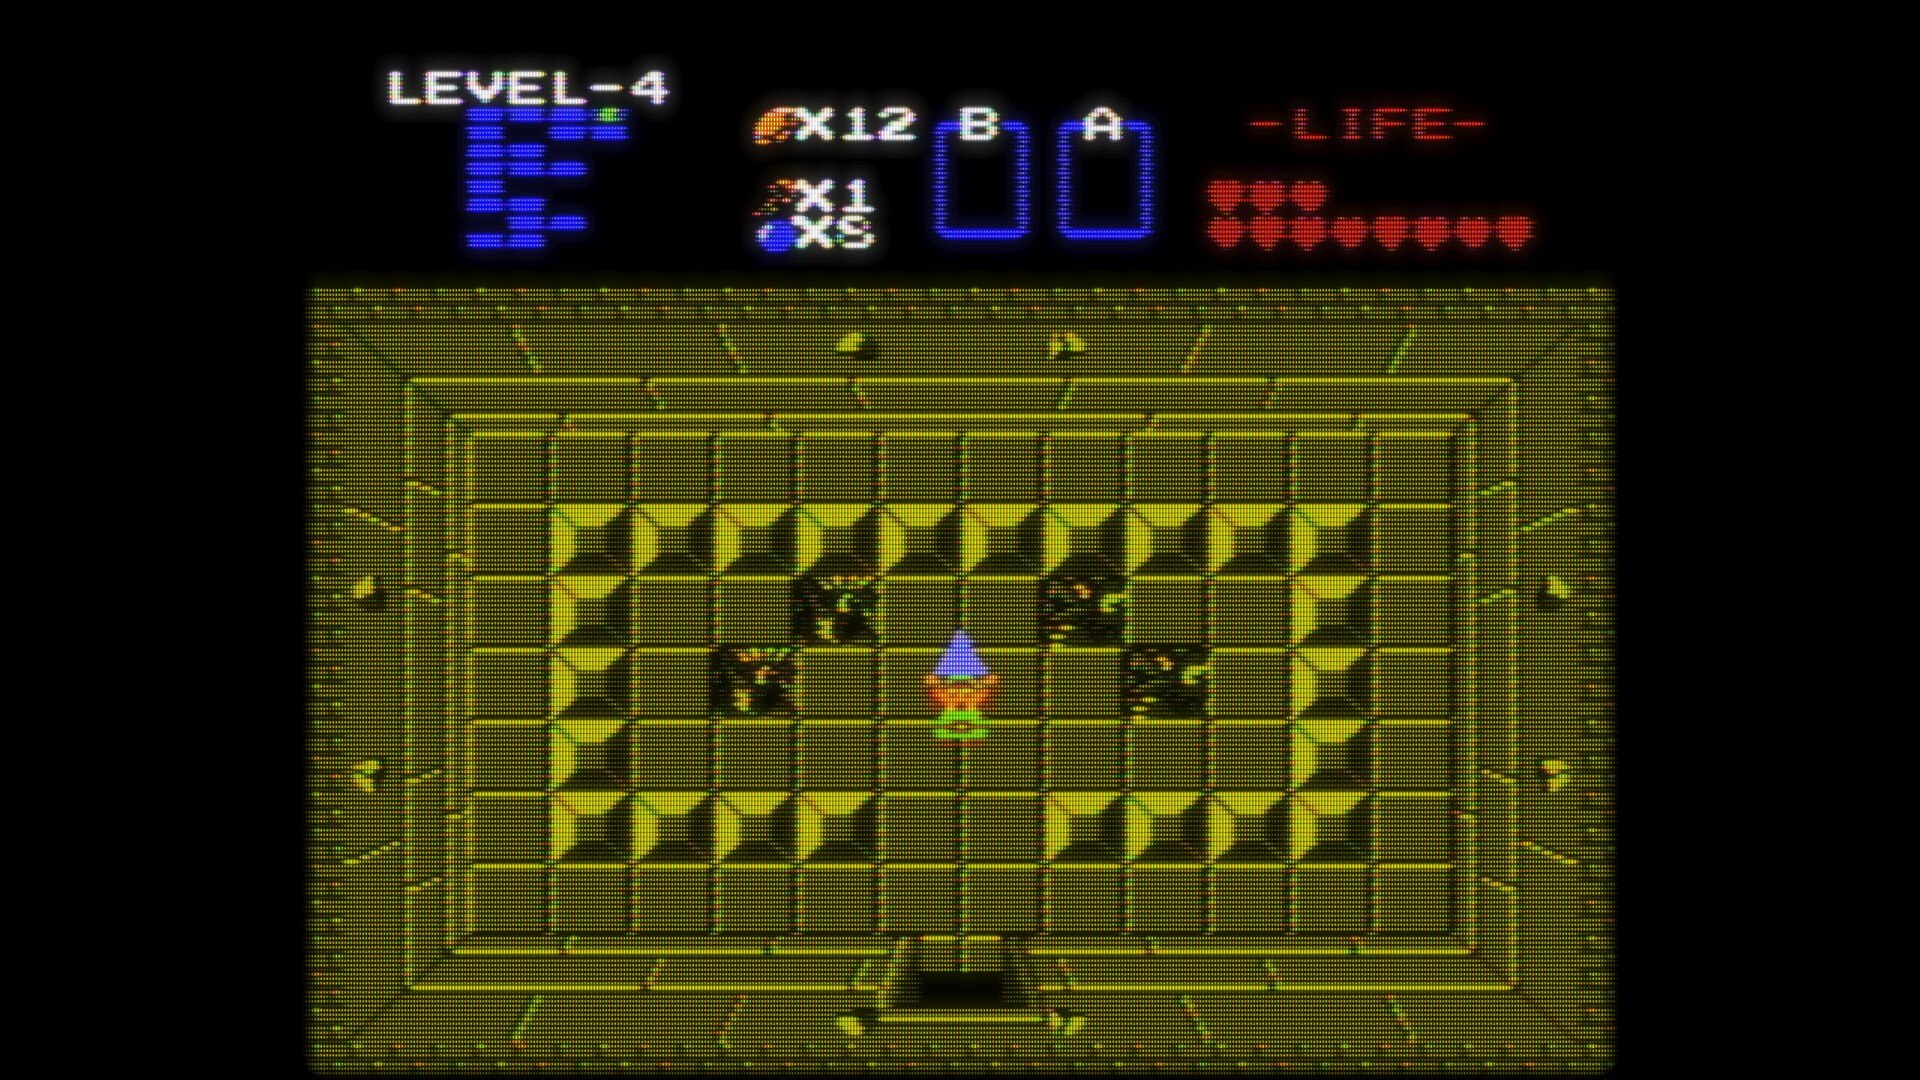 An in-game screenshot of The Legend of Zelda using the CRT Royale NTSC 320px Composite shader on RetroArch